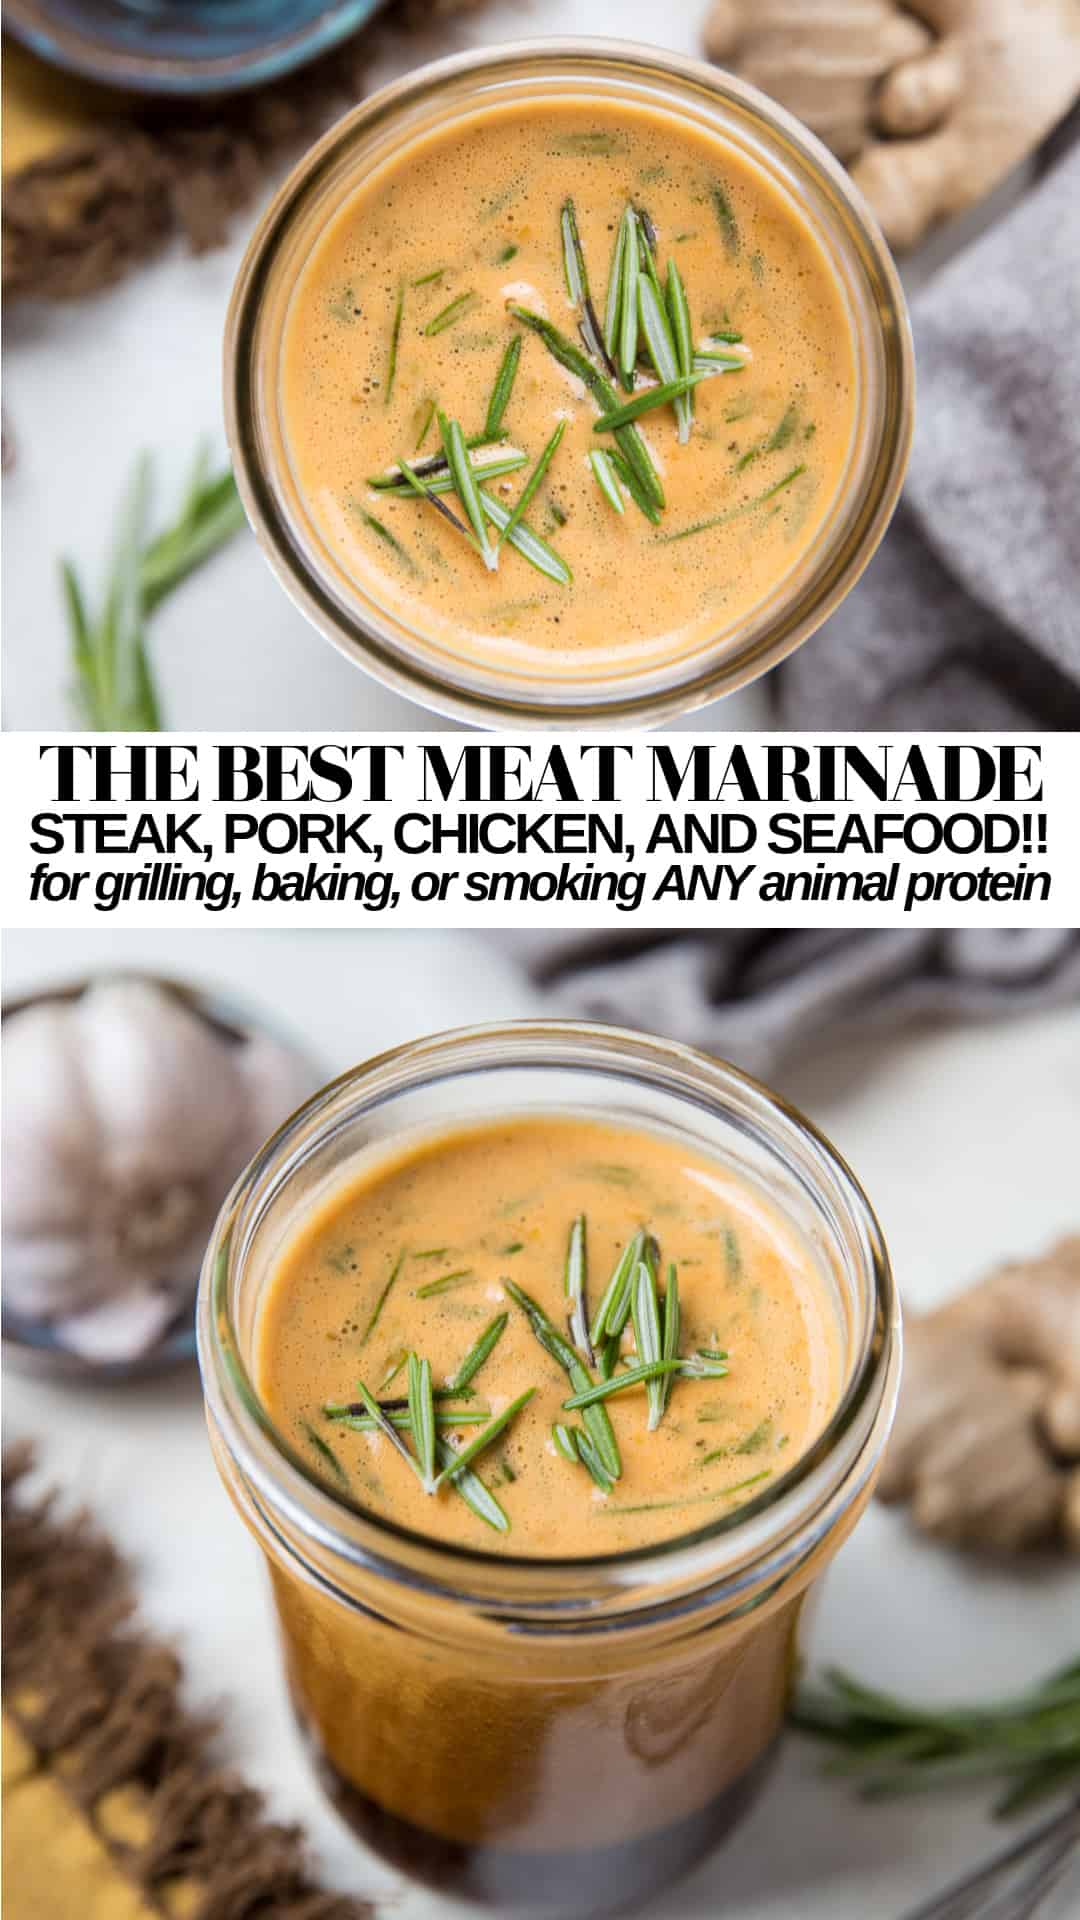 The BEST Steak Marinade - an amazing flavorful marinade for beef, pork, chicken, and/or seafood. Make it for grilling, roasting or smoking any animal protein!